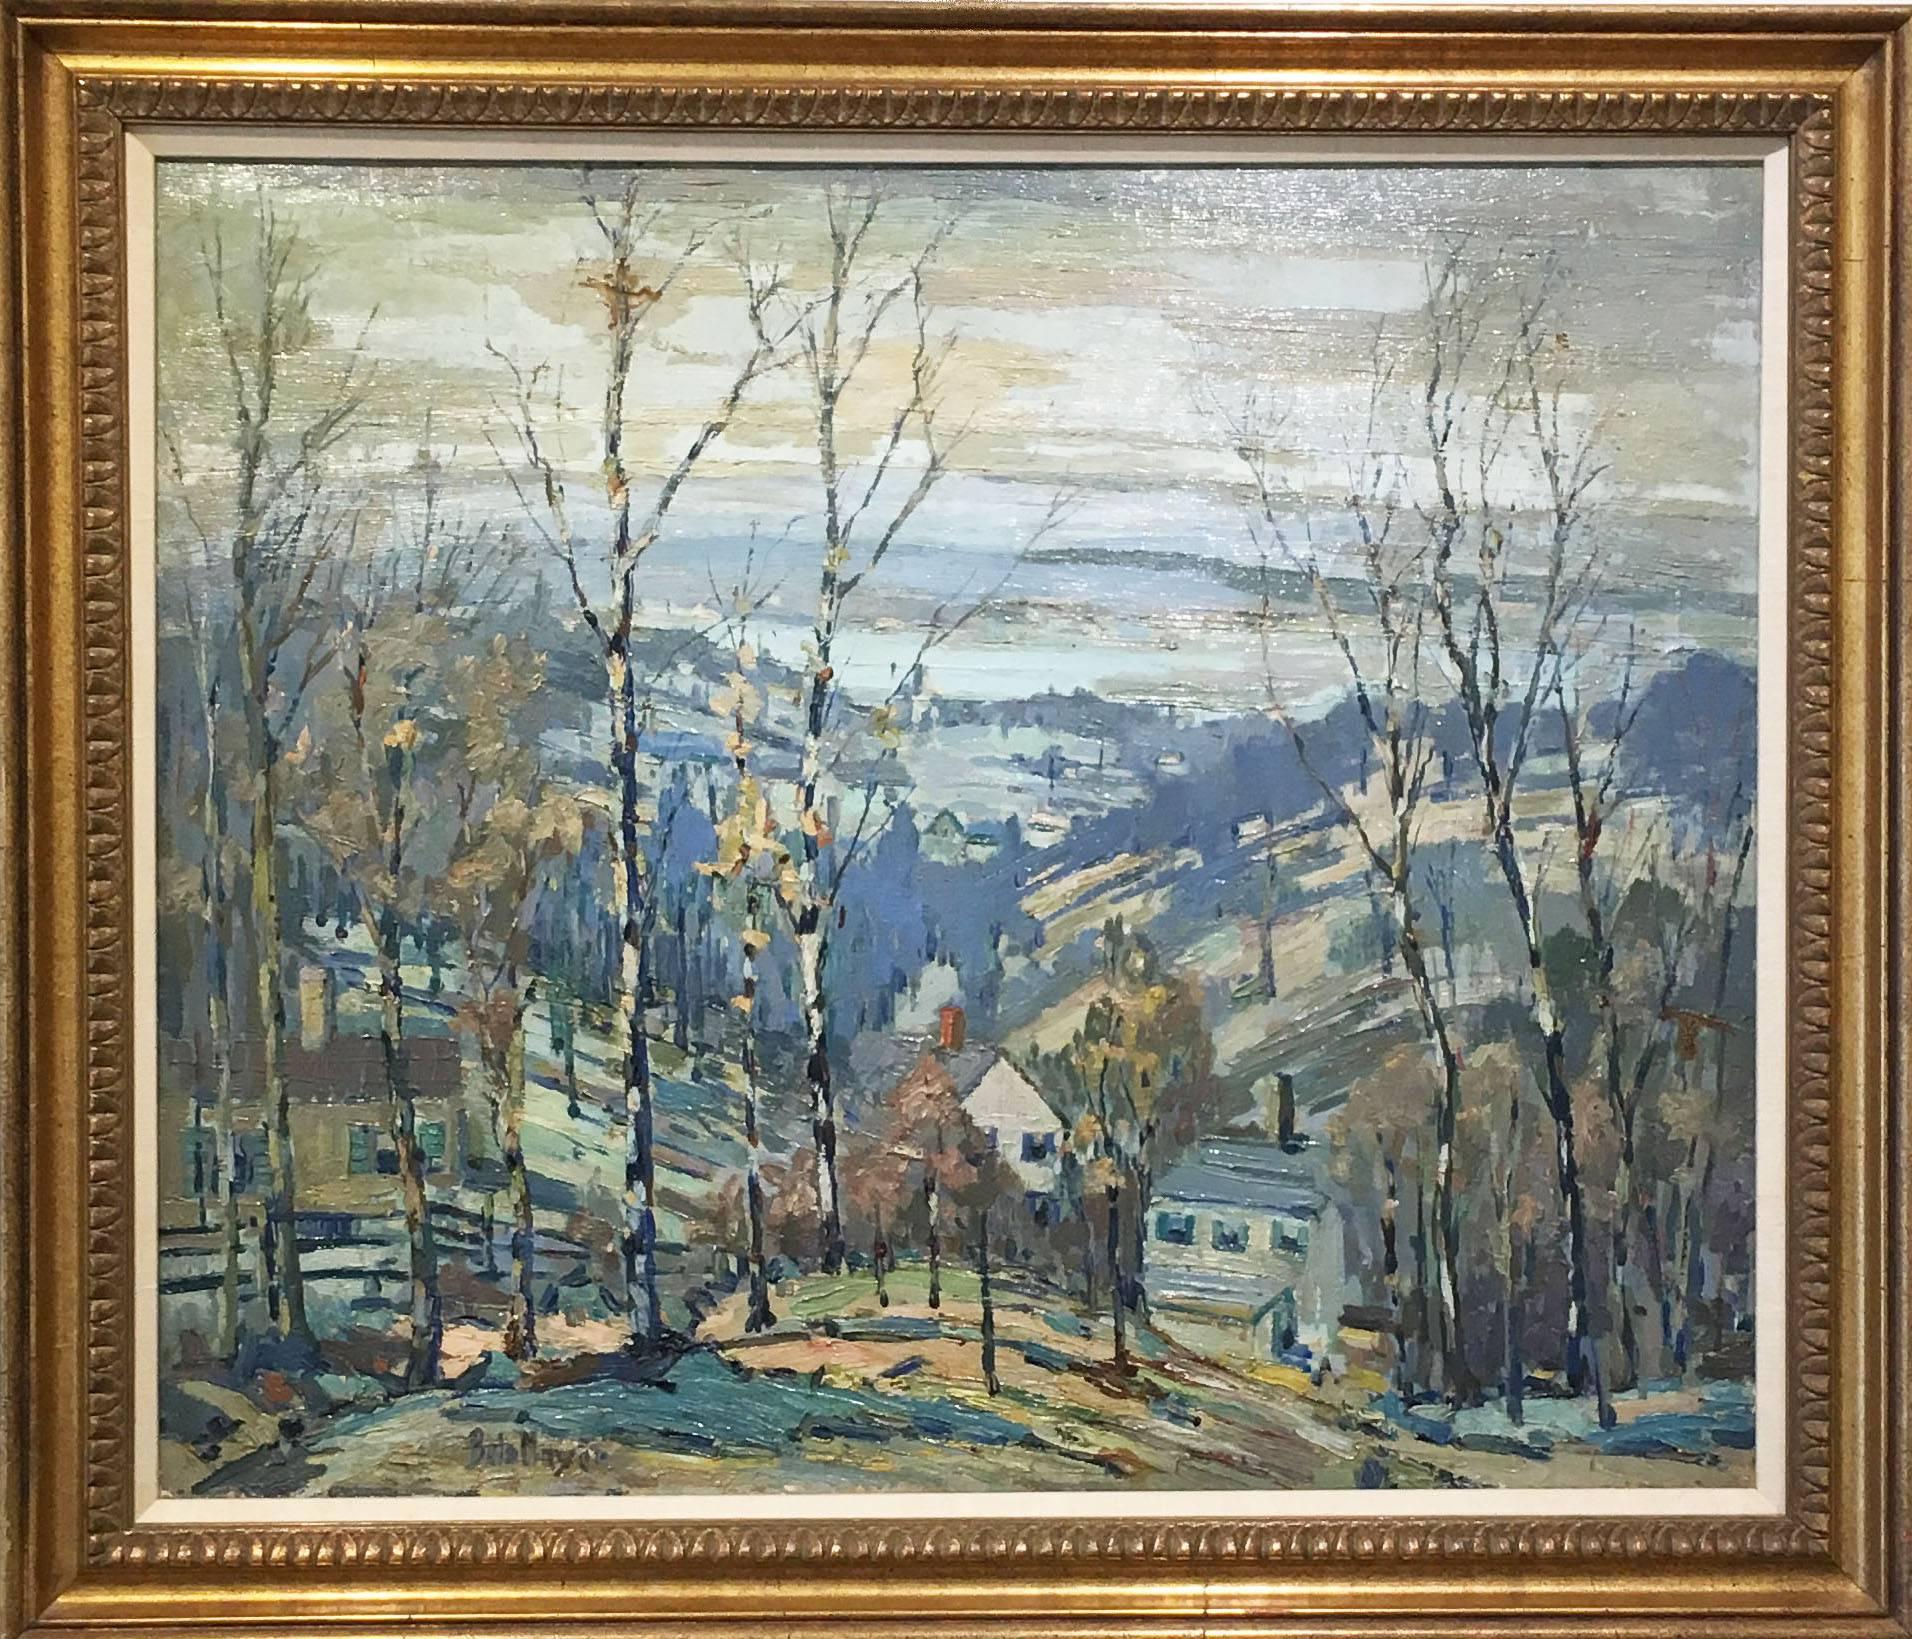 Beacon Hill Overlook - Painting by Peter Bela Mayer